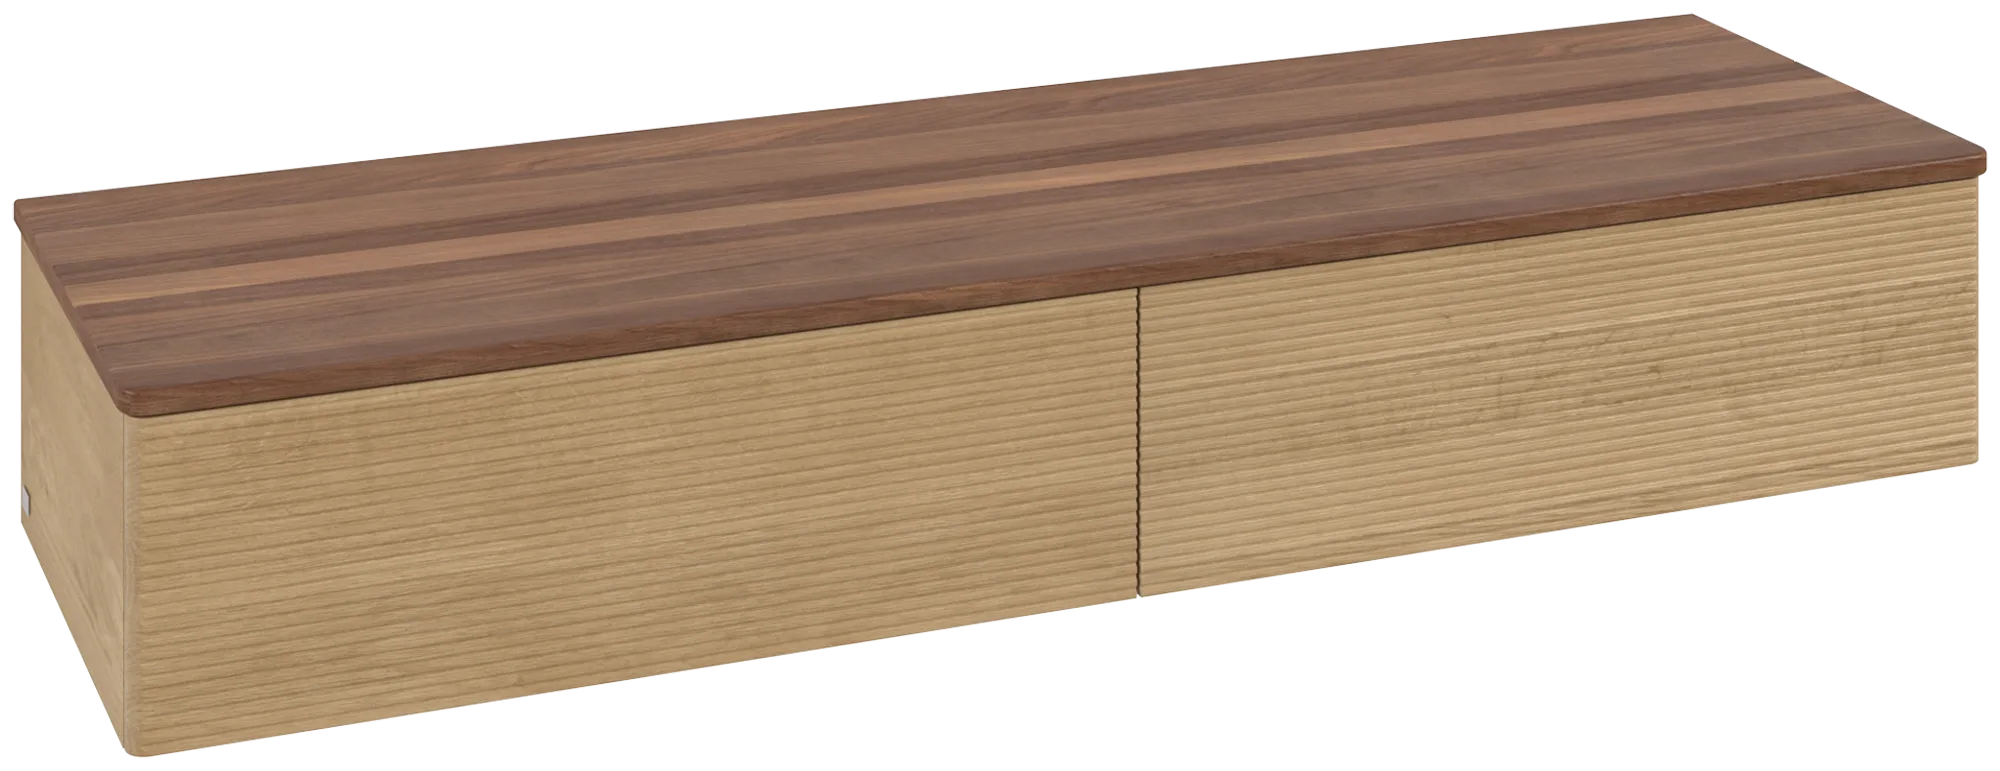 Obrázek VILLEROY BOCH Antao Sideboard, 2 pull-out compartments, 1600 x 268 x 500 mm, Front with grain texture, Honey Oak / Warm Walnut #K42102HN